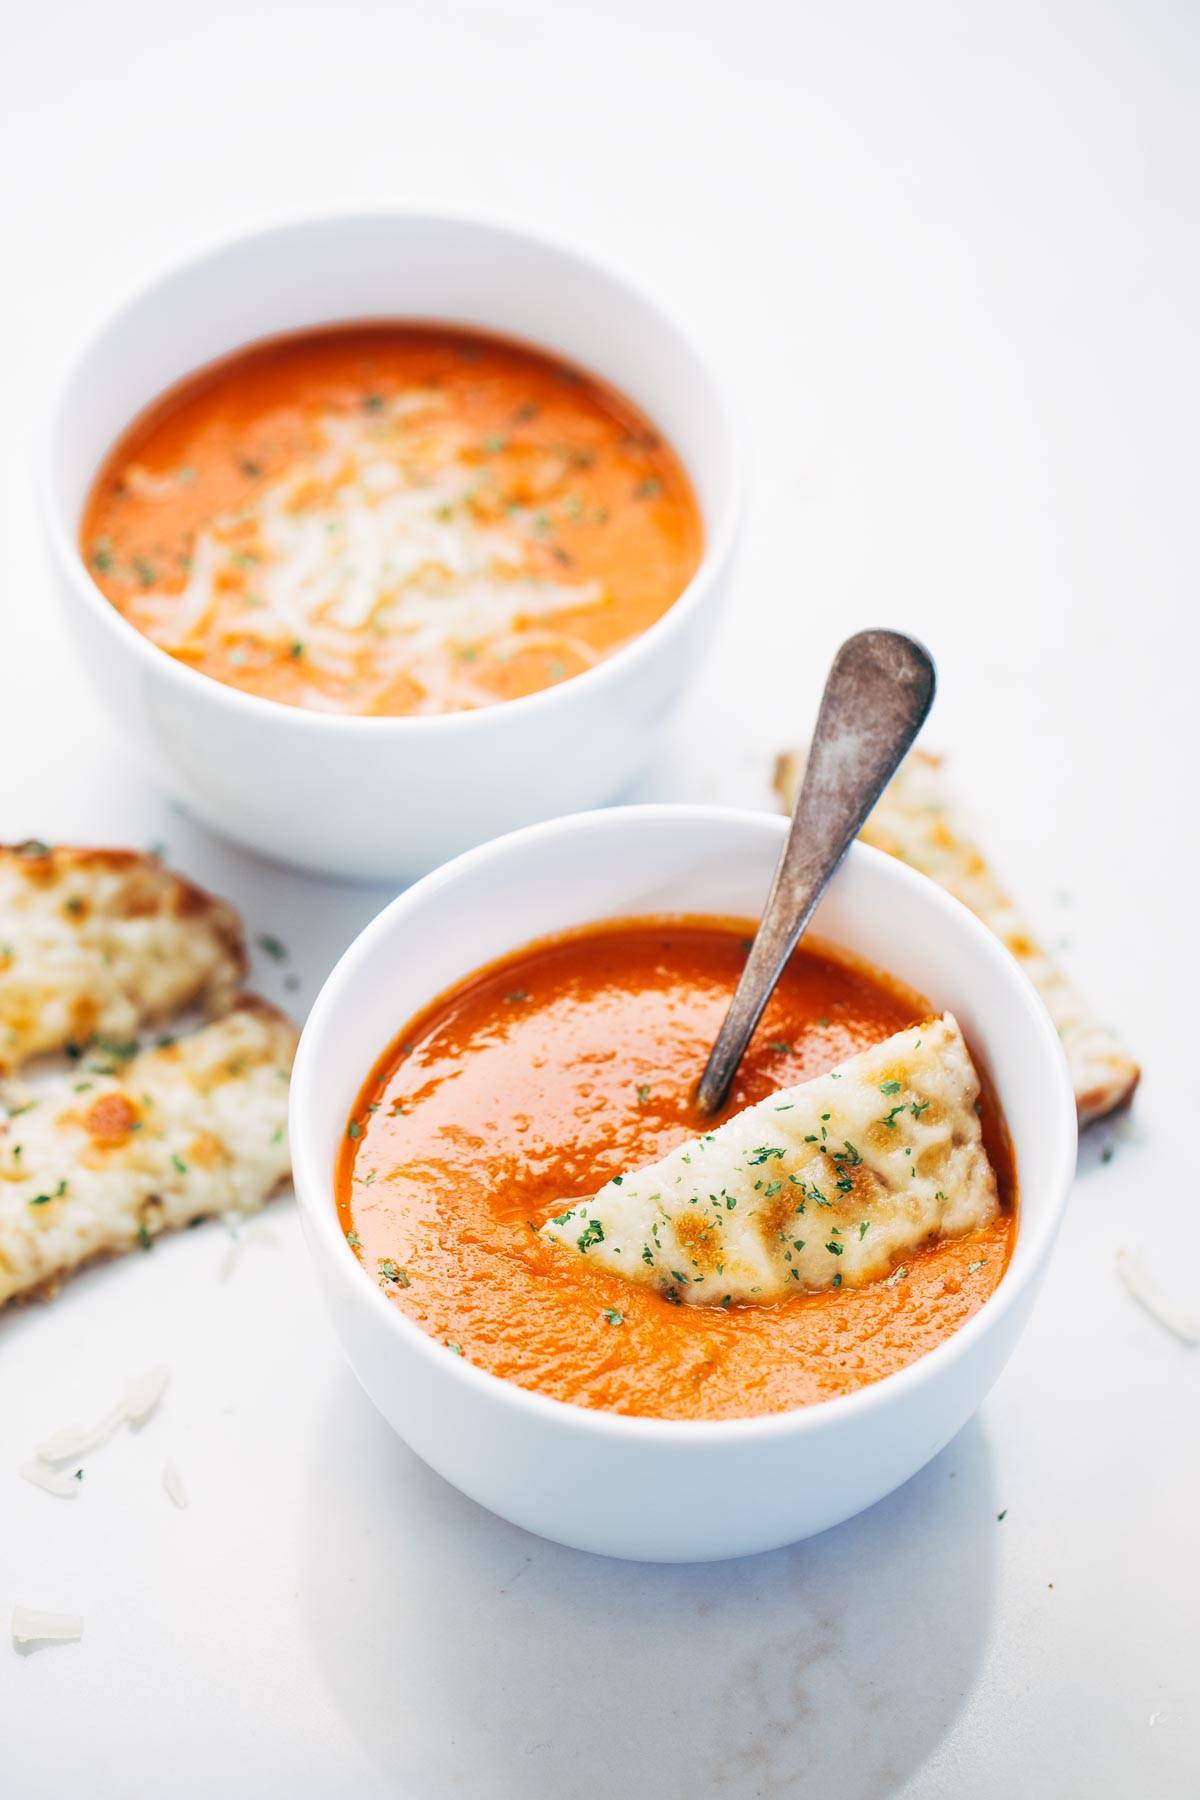 Tomato soup in bowls with cheese and bread.